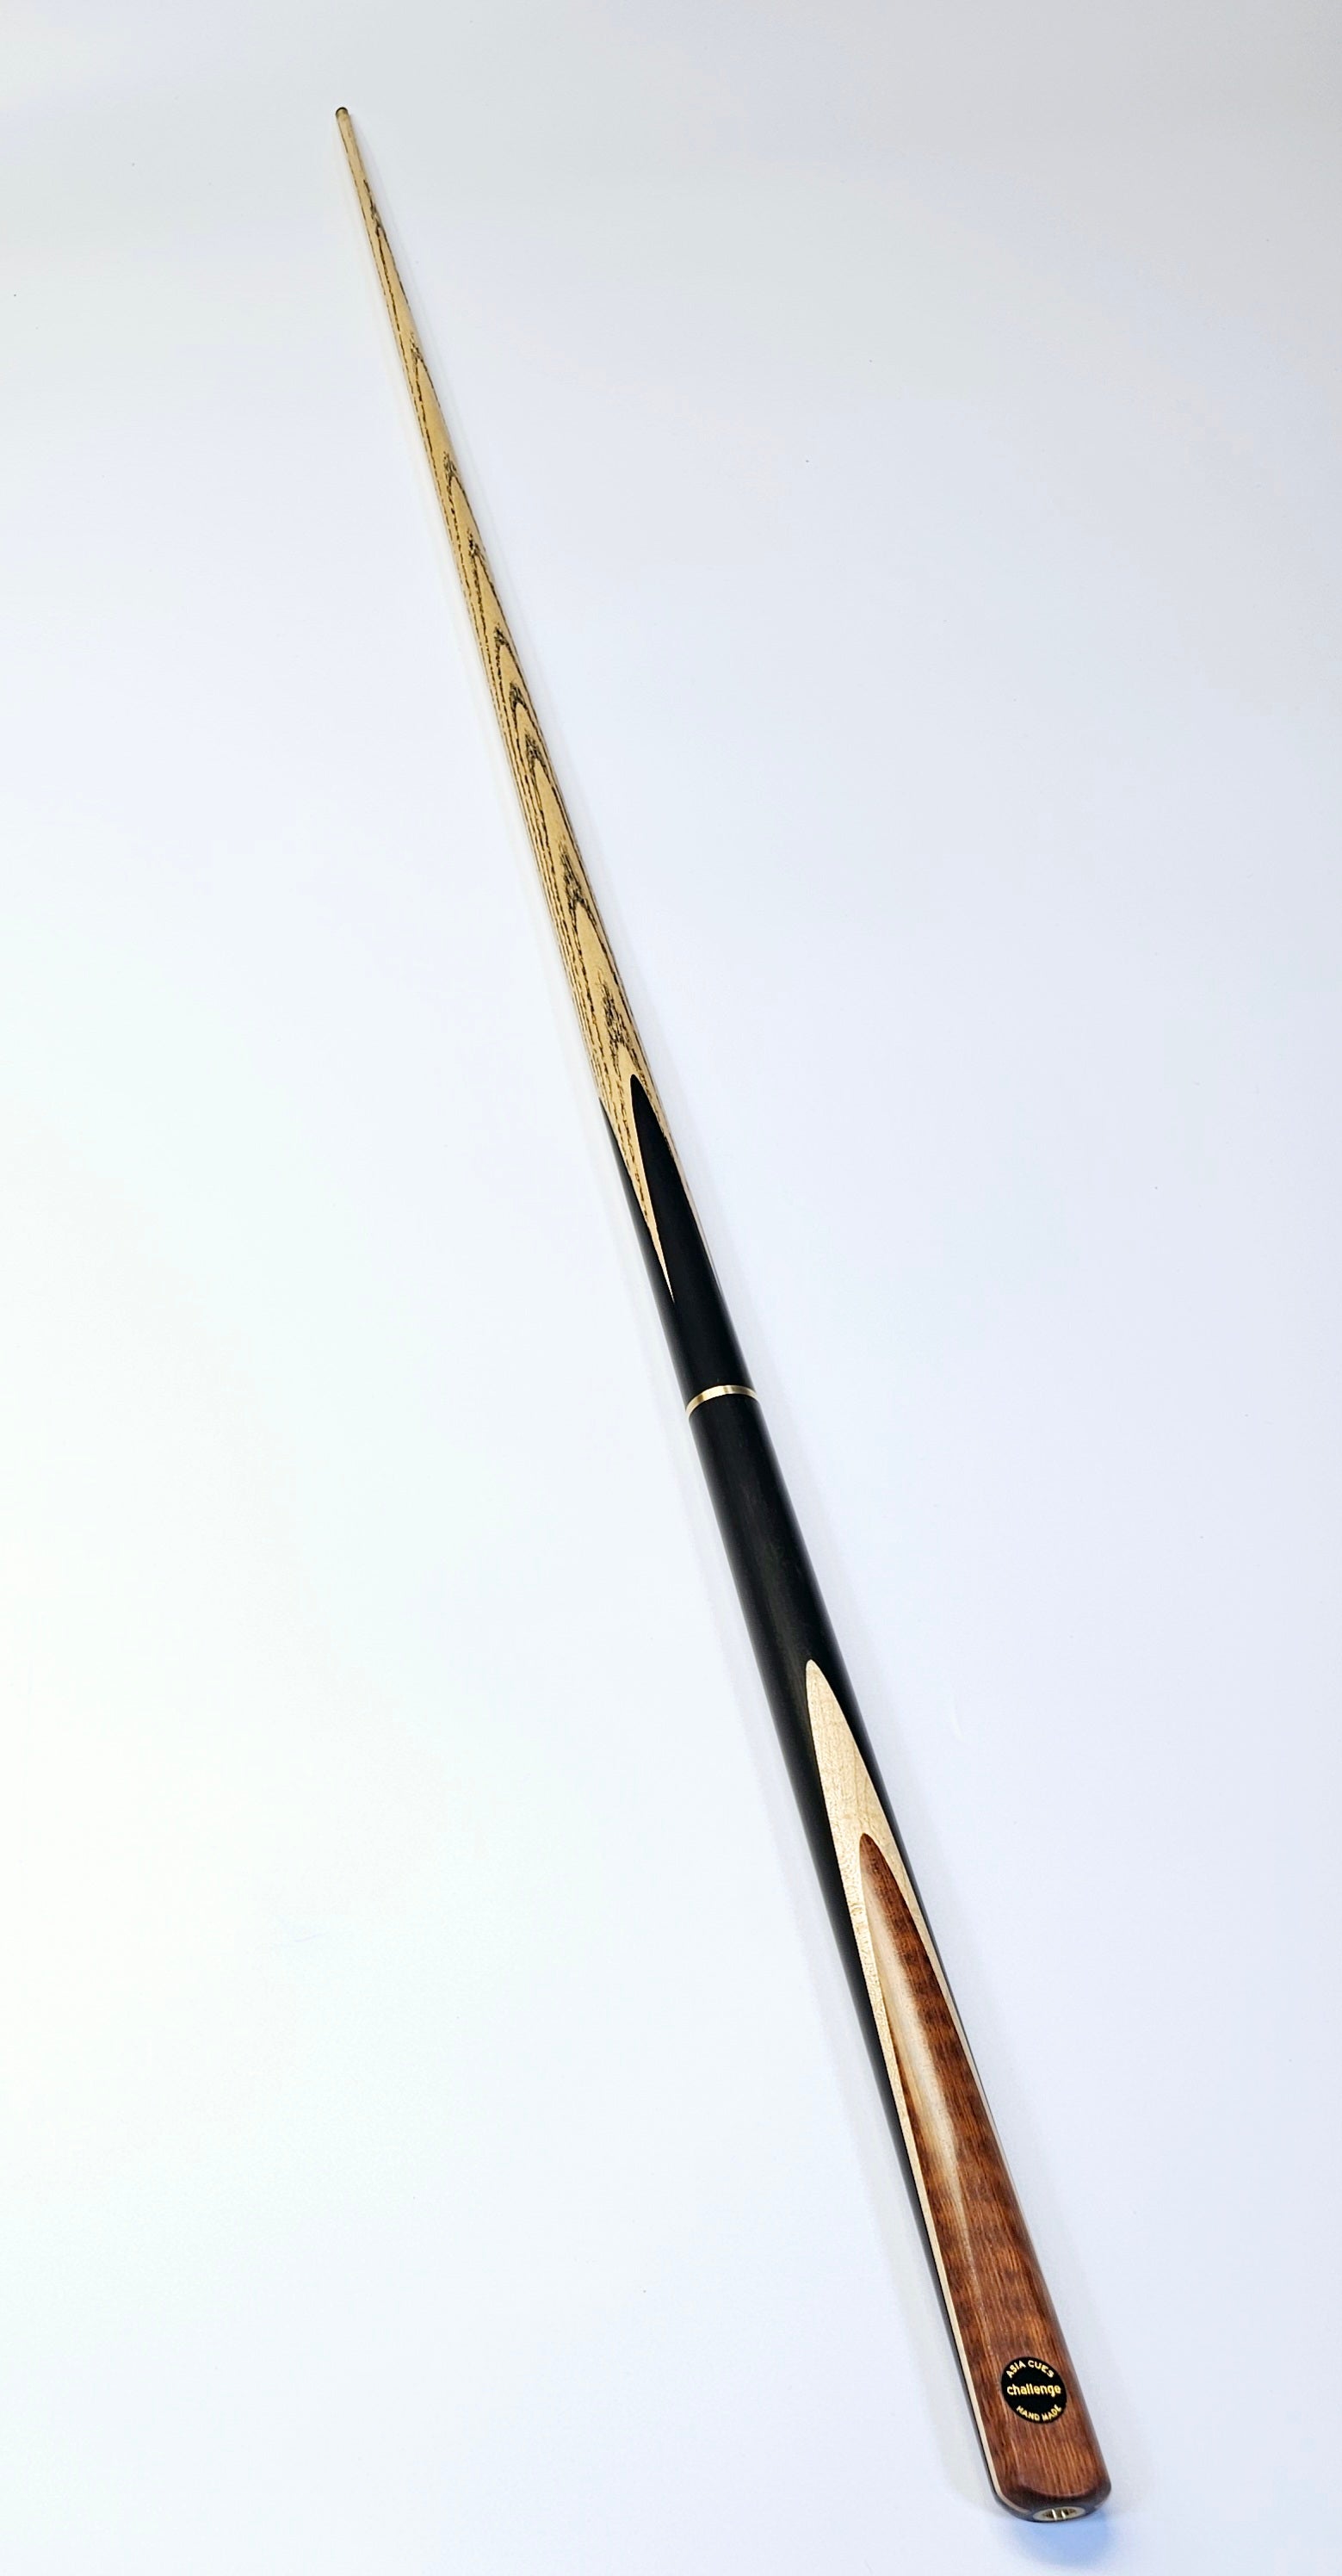 Asia Cues Challenge - 3/4 Jointed Pool Cue 8.8mm Tip, 18.2oz, 58"